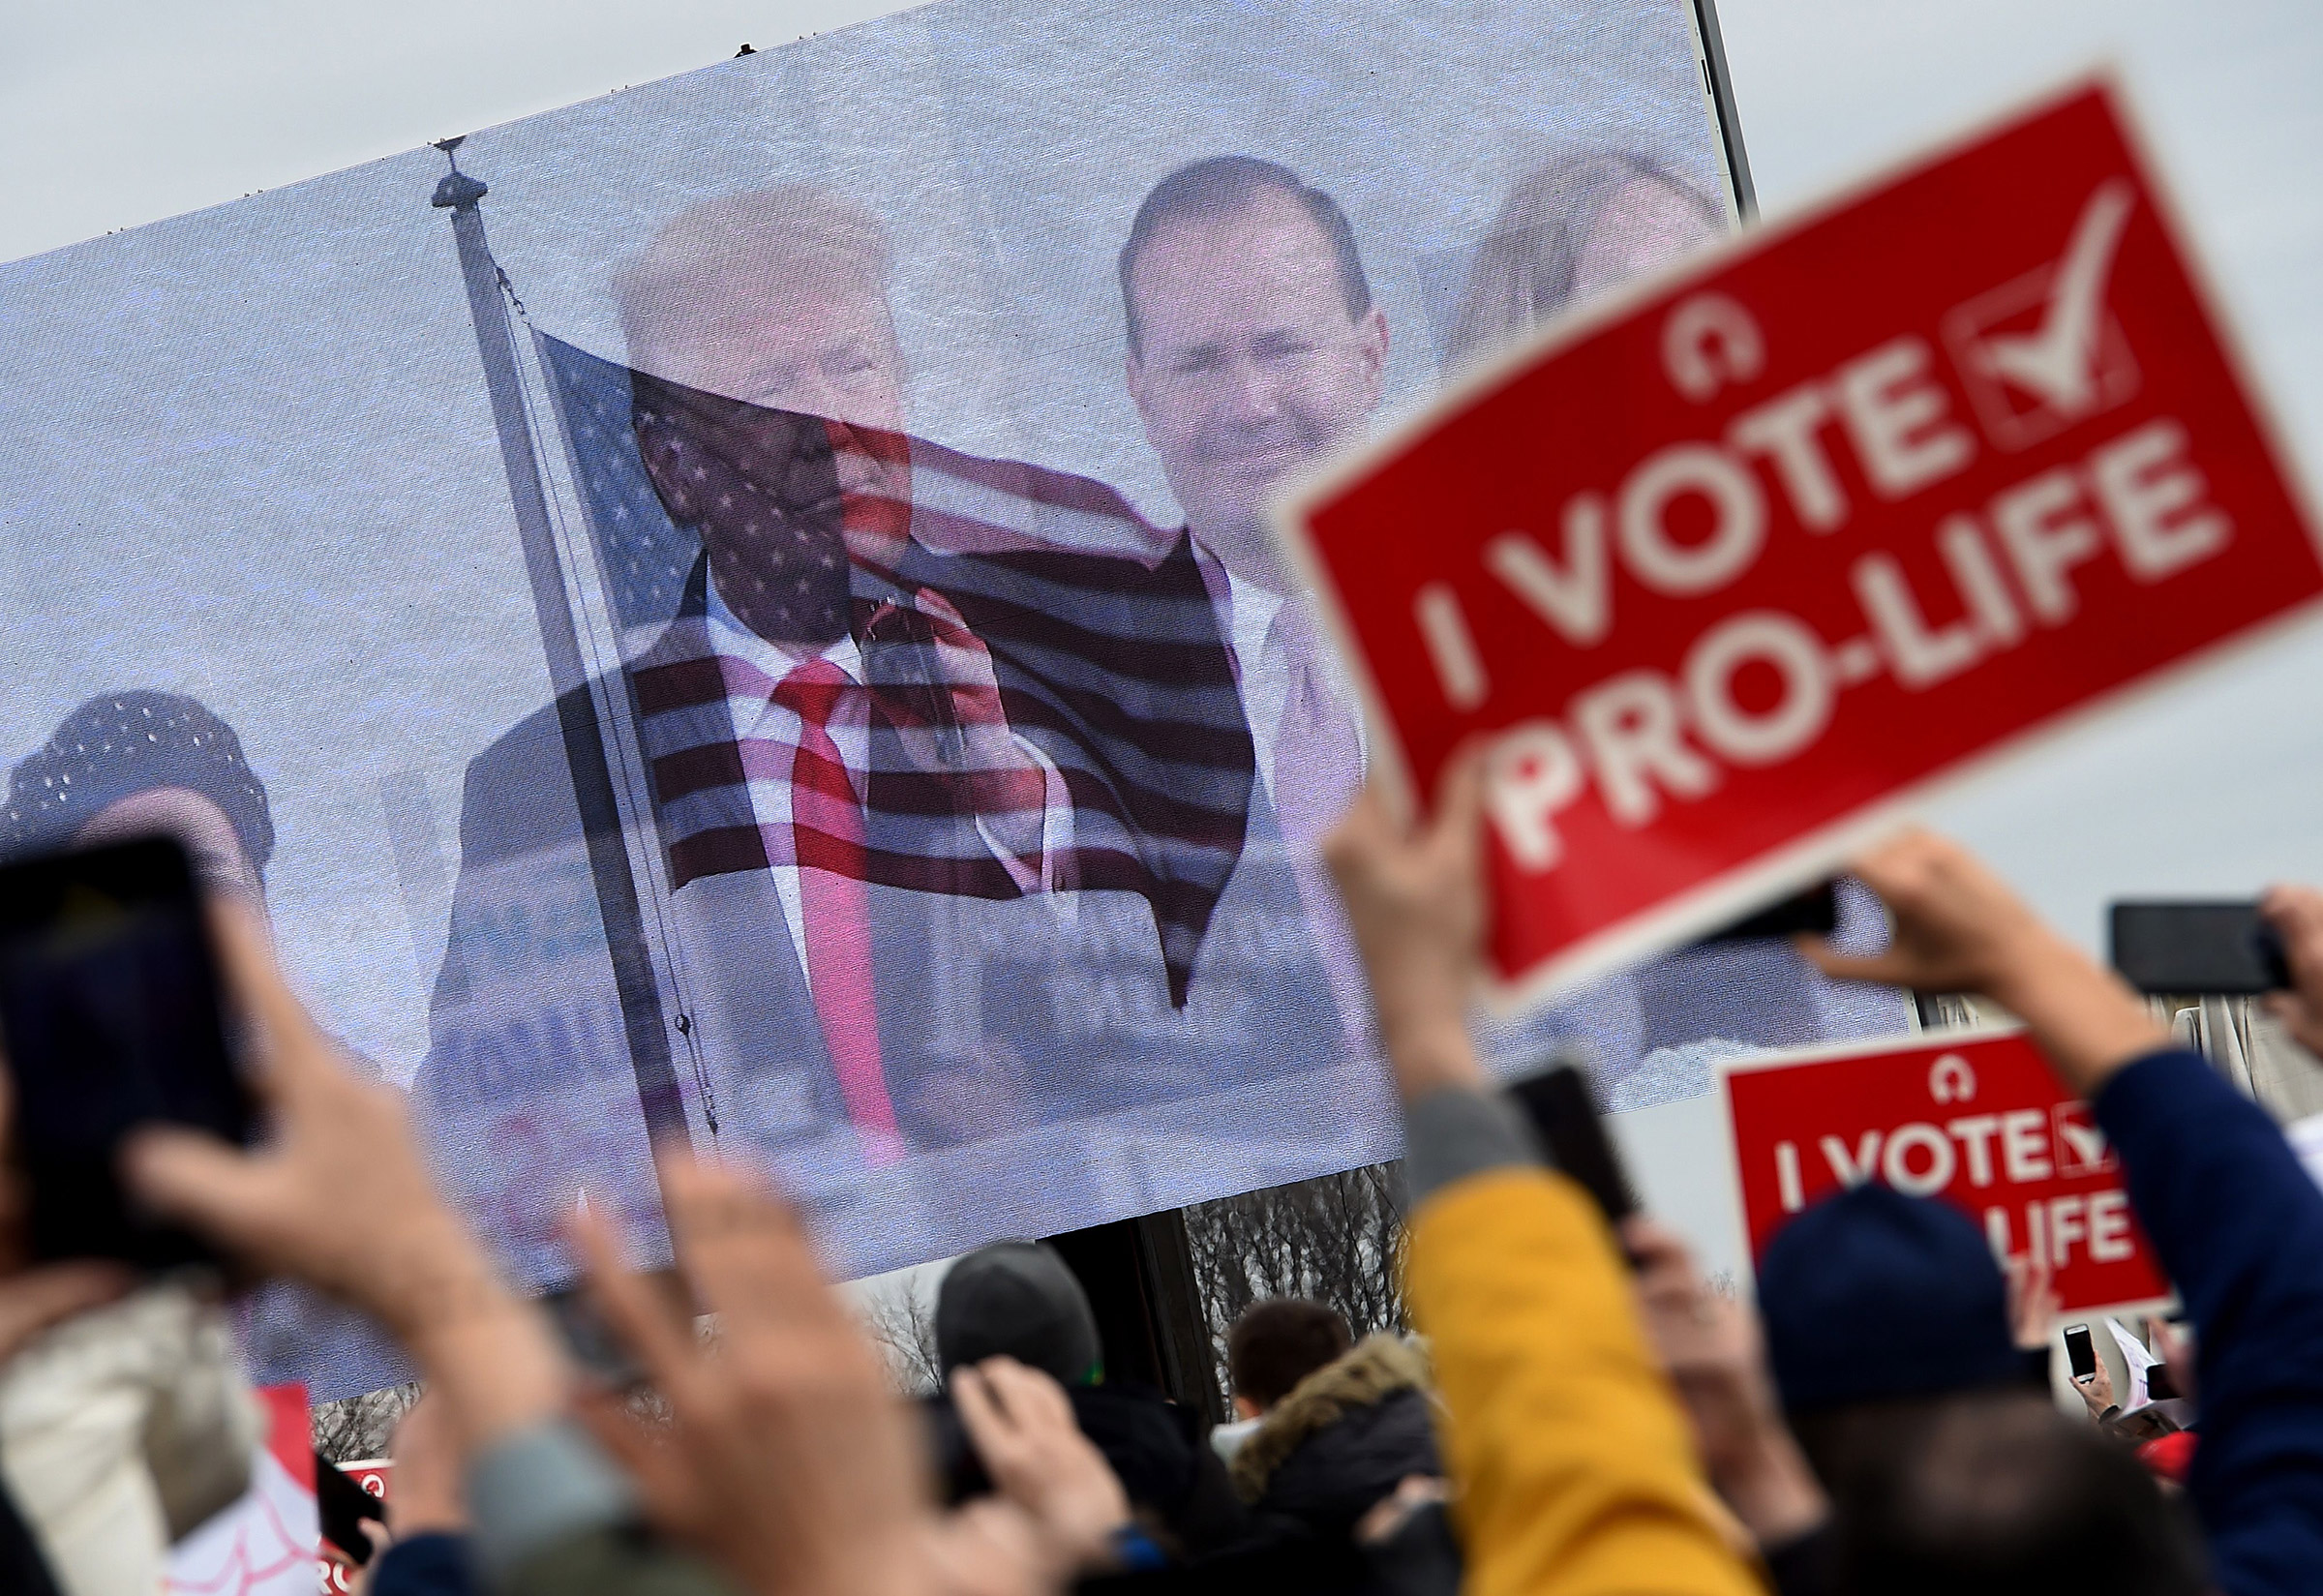 Pro-life demonstrators listen to President Donald Trump at the 47th annual "March for Life" in Washington, D.C., on Jan. 24, 2020. (Olivier Douliery—AFP/Getty Images)